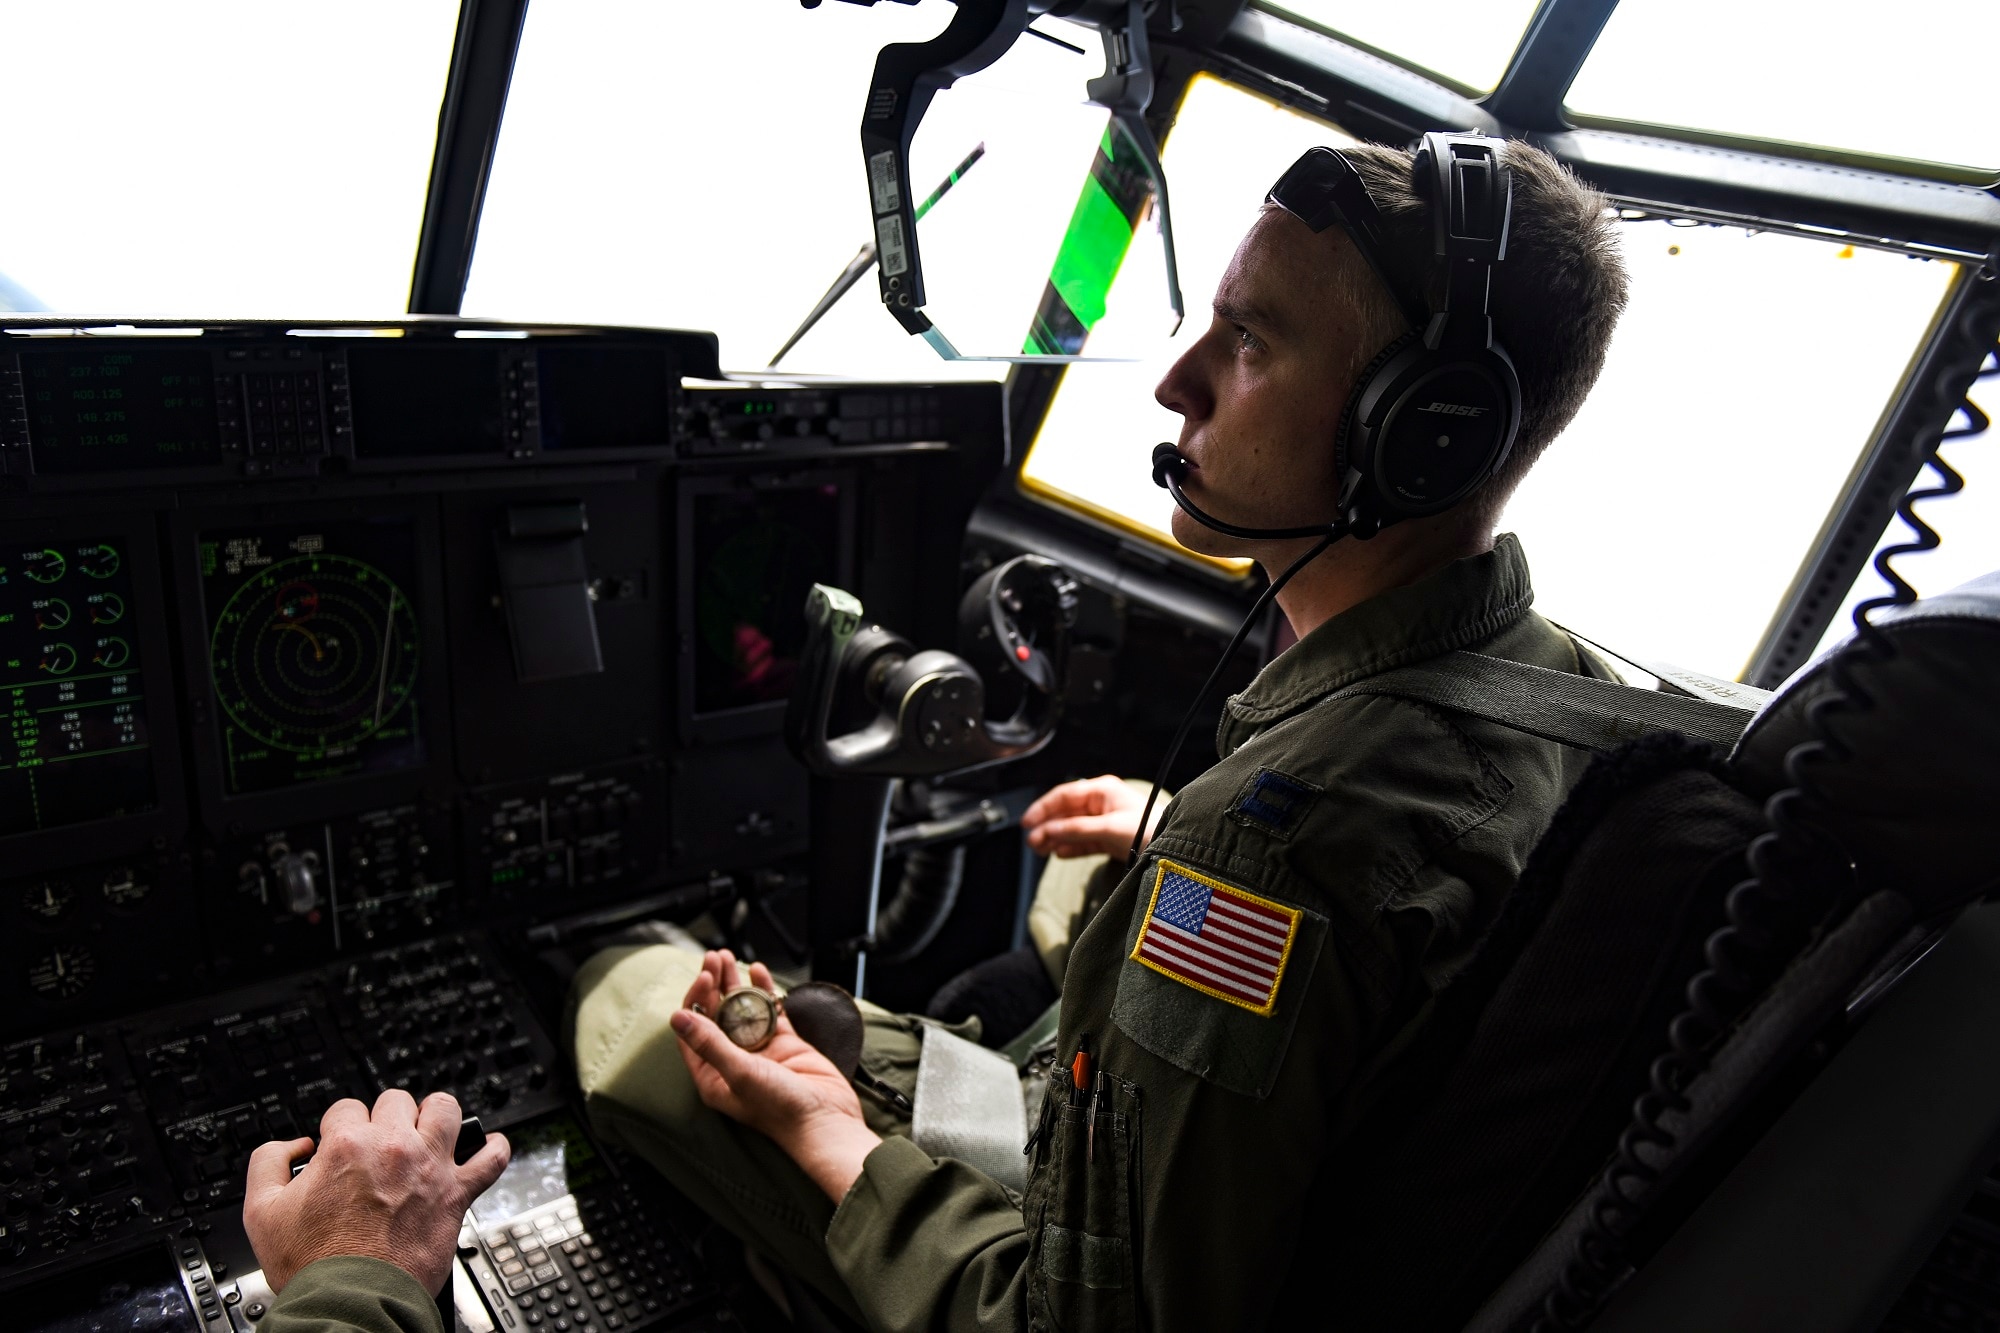 U.S. Air Force Capt. Matthew Coffey, 37th Airlift Squadron pilot, flies over Normandy, France, with his grandfather’s compass in a C-130J Super Hercules June 3, 2017. Coffey’s grandfather, Donald, served in WWII as a half-track driver and was wounded in Normandy from an artillery shell while performing his duties approximately a month after D-Day. (U.S. Air Force photo by Senior Airman Devin Boyer)